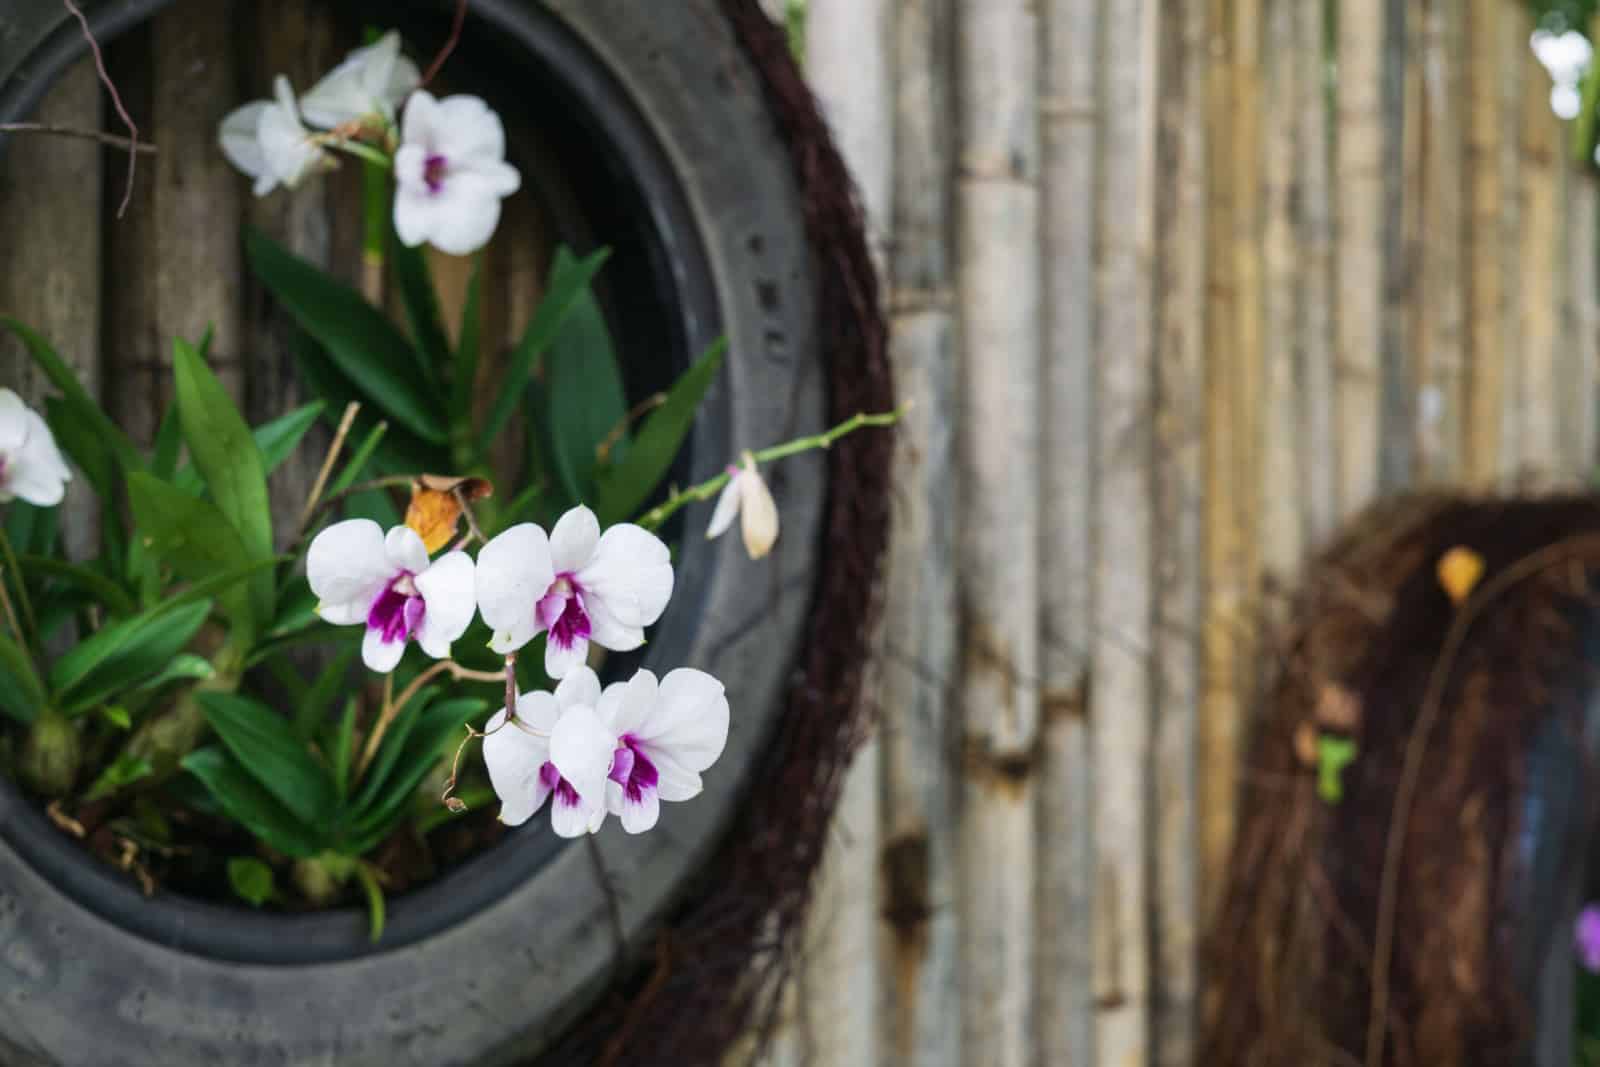 The white orchid were planted in the recycle tires in the garden.